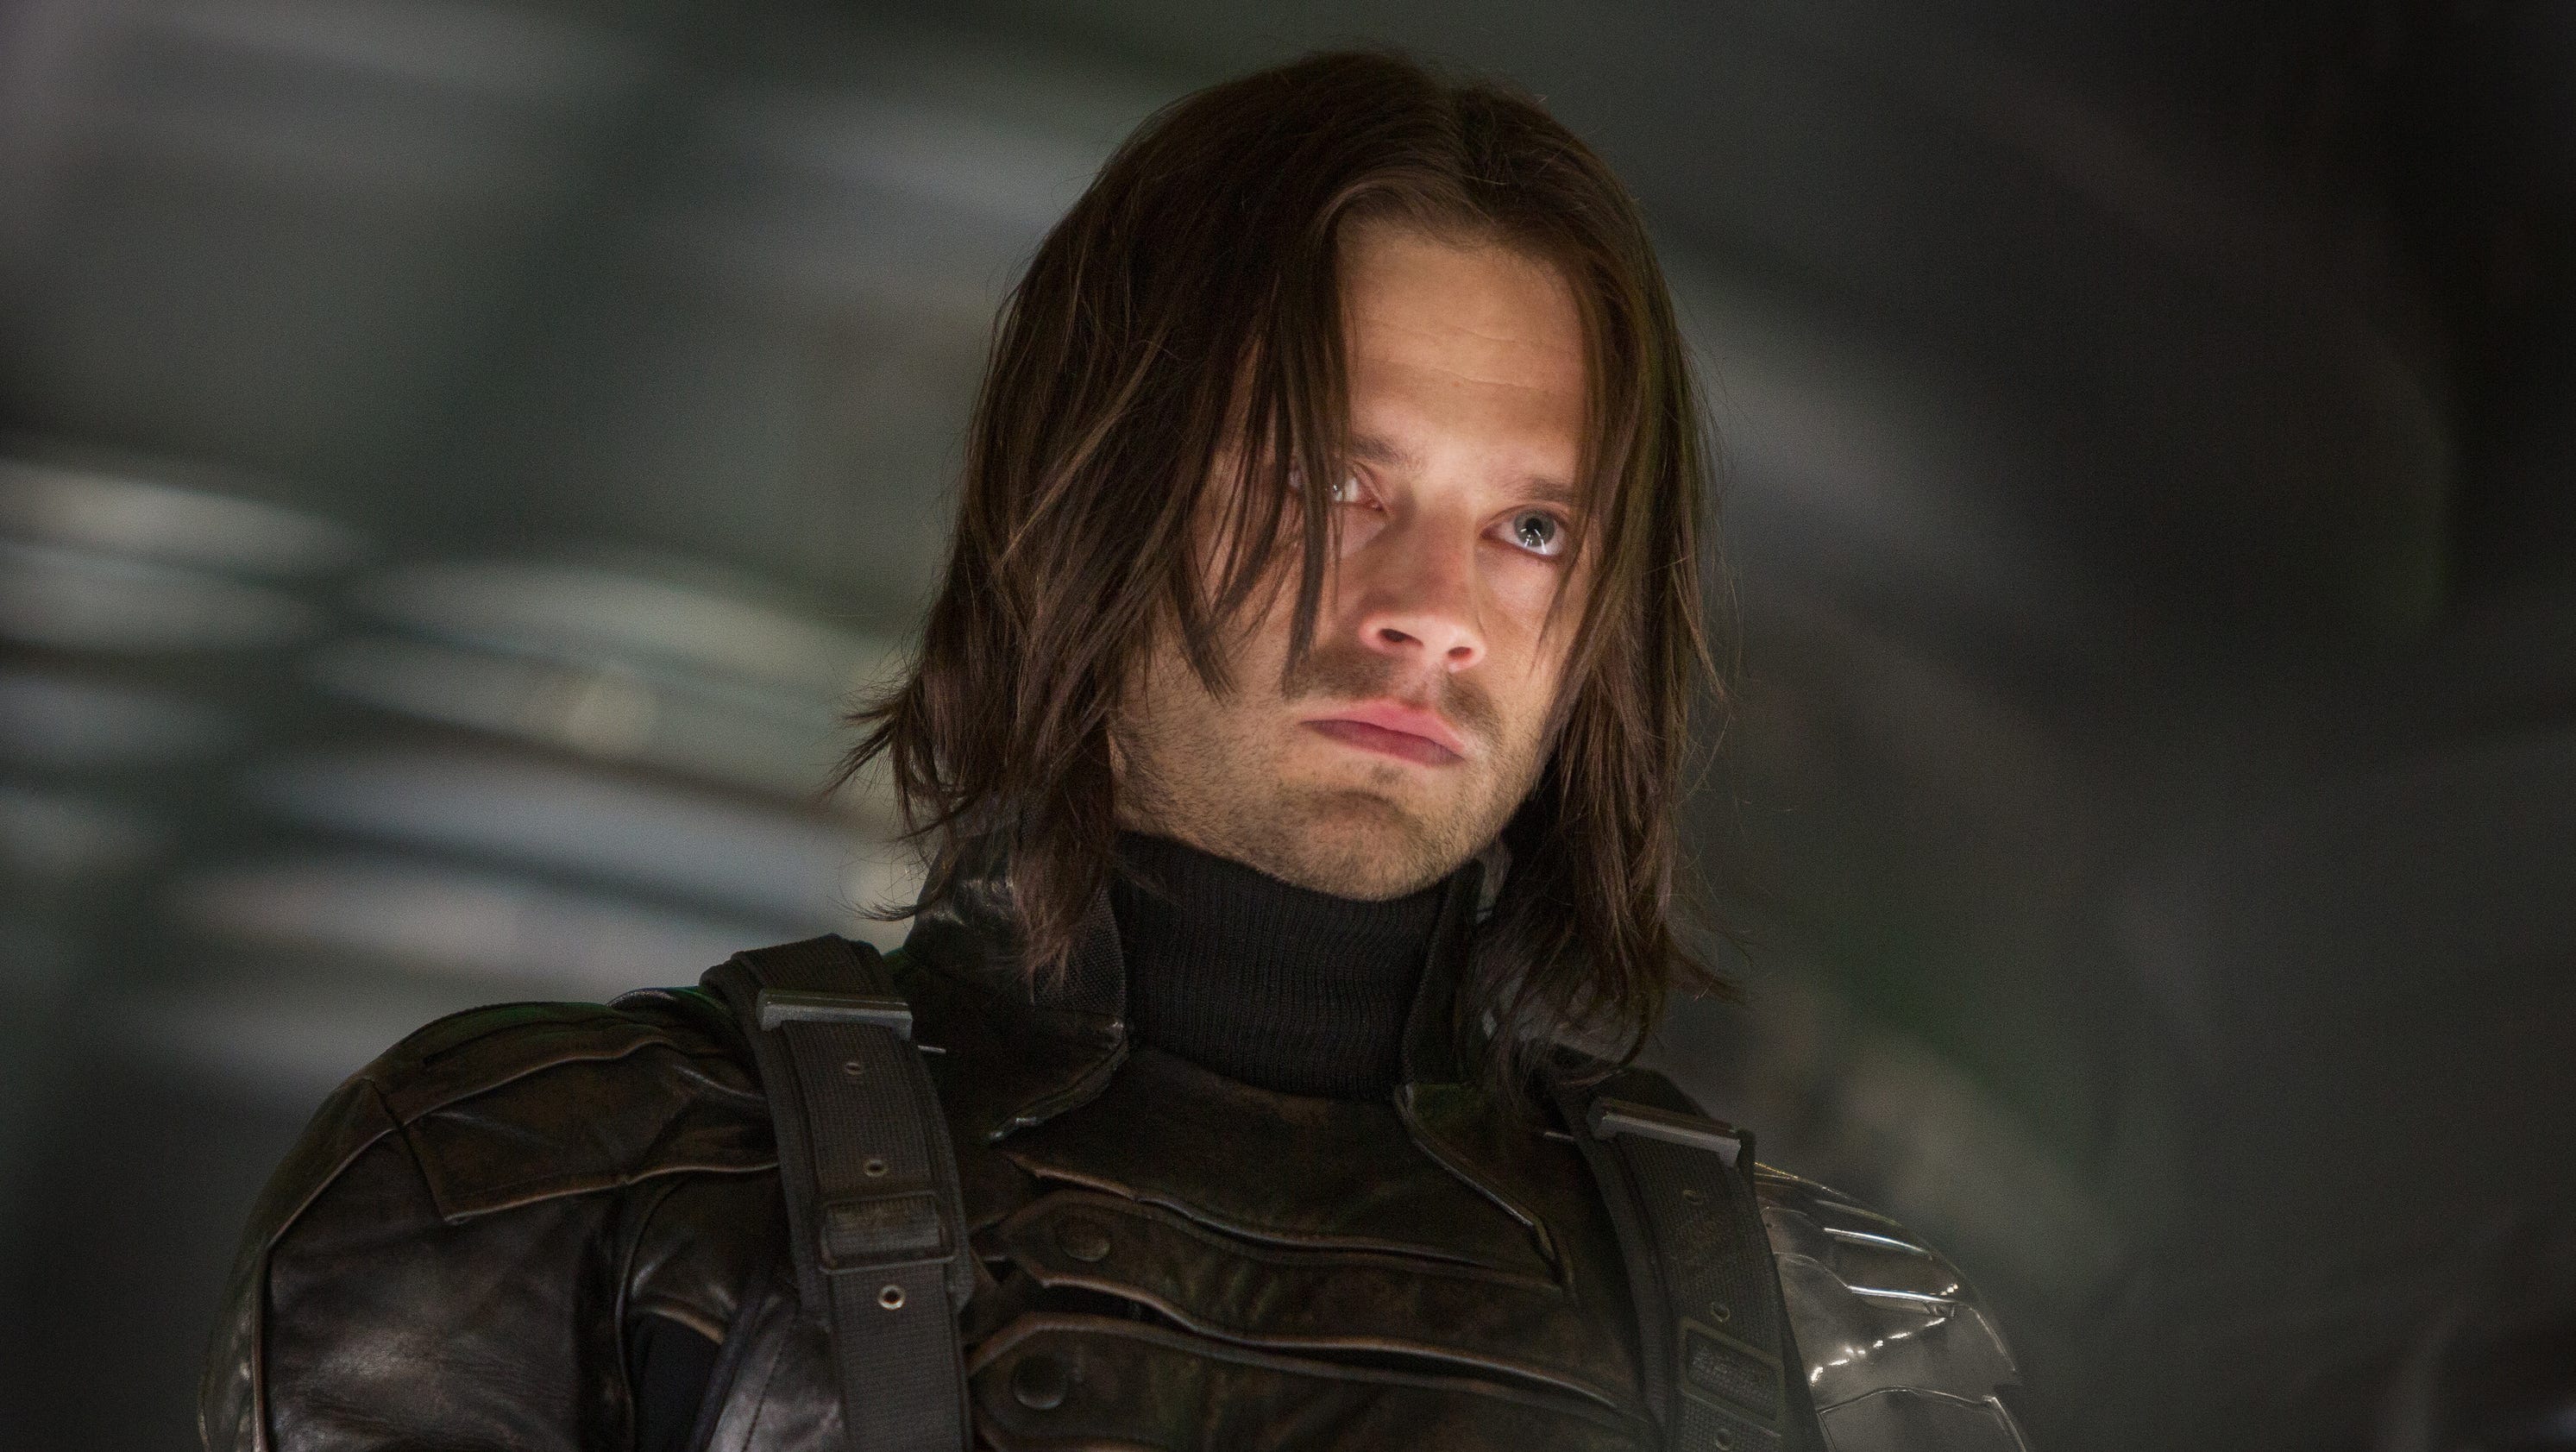 Stan is a man of action as 'The Winter Soldier'3200 x 1680